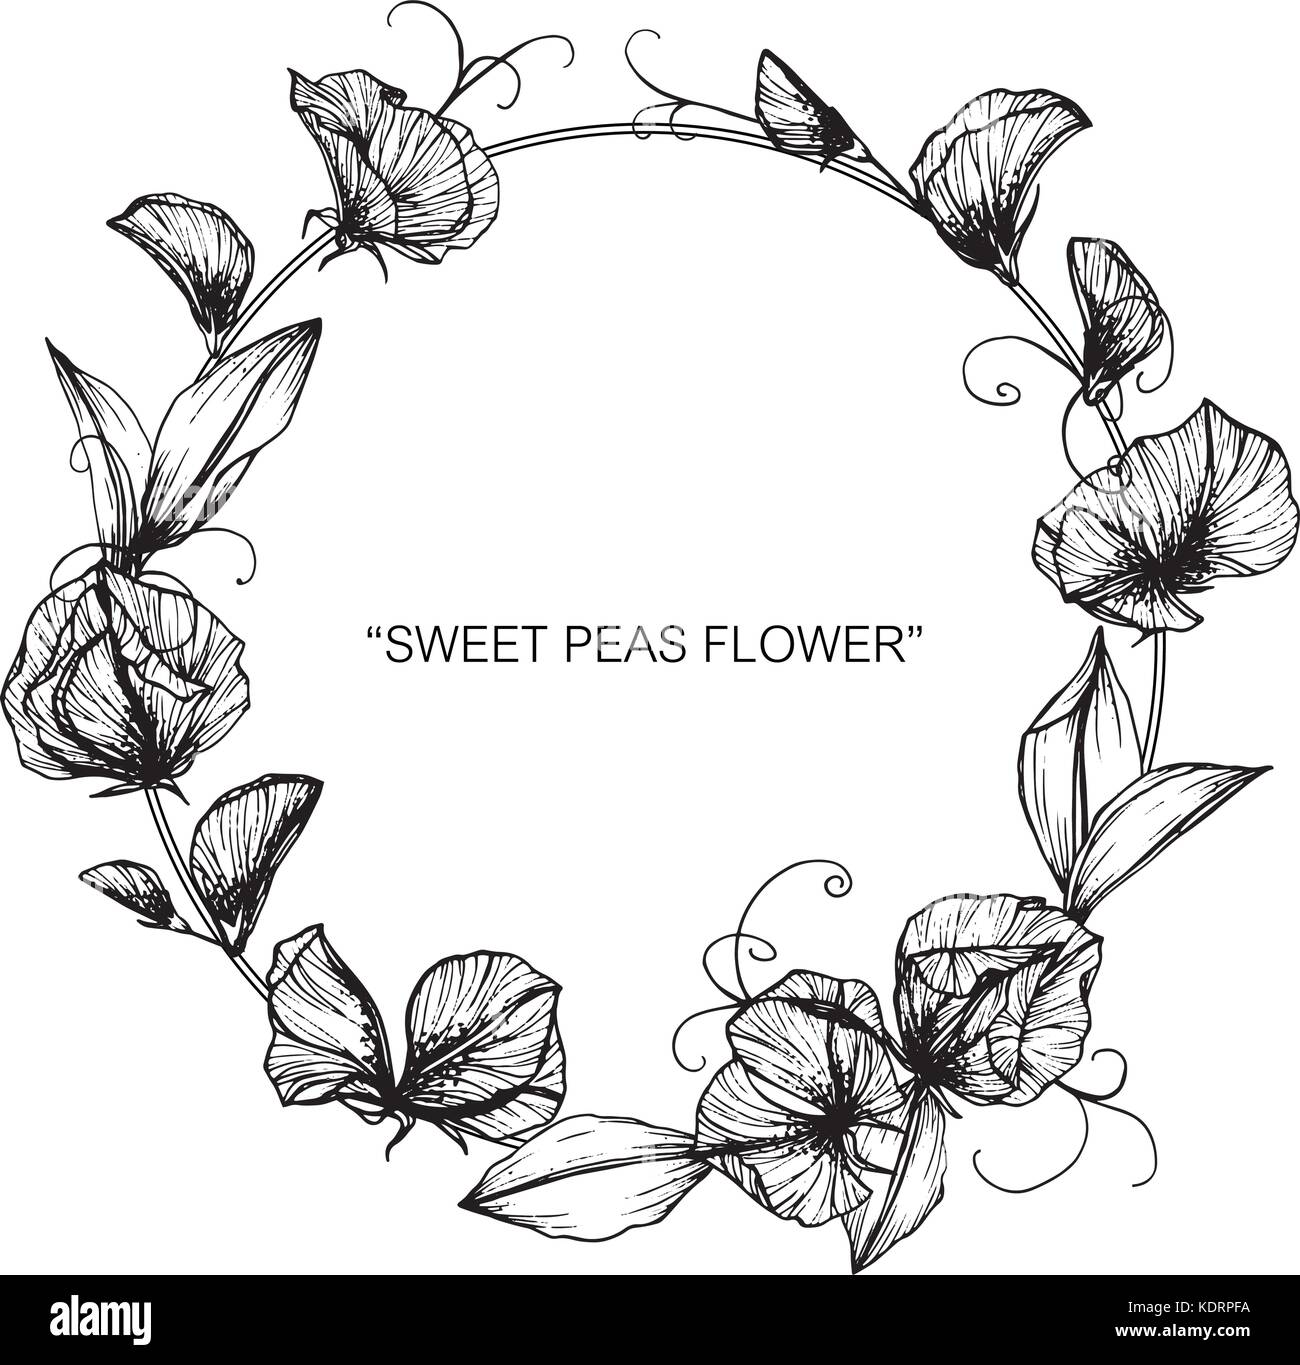 Sweet Pea Flower Drawing Illustration Black And White With Line Stock Vector Image Art Alamy